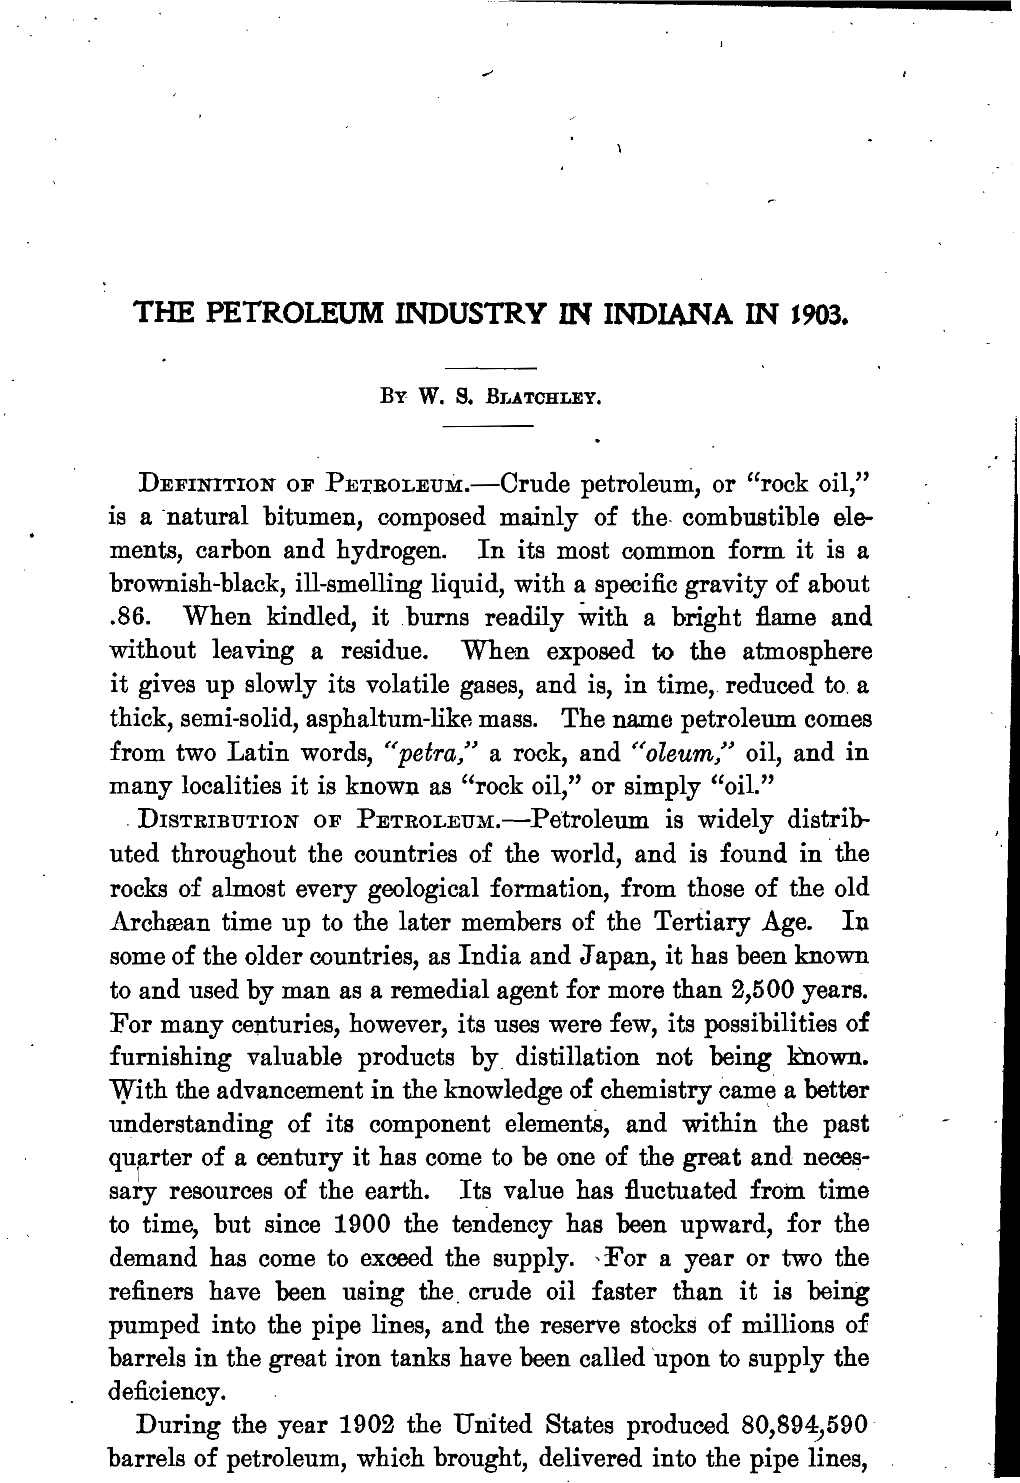 The Petroleum Industry in Indiana in 1903